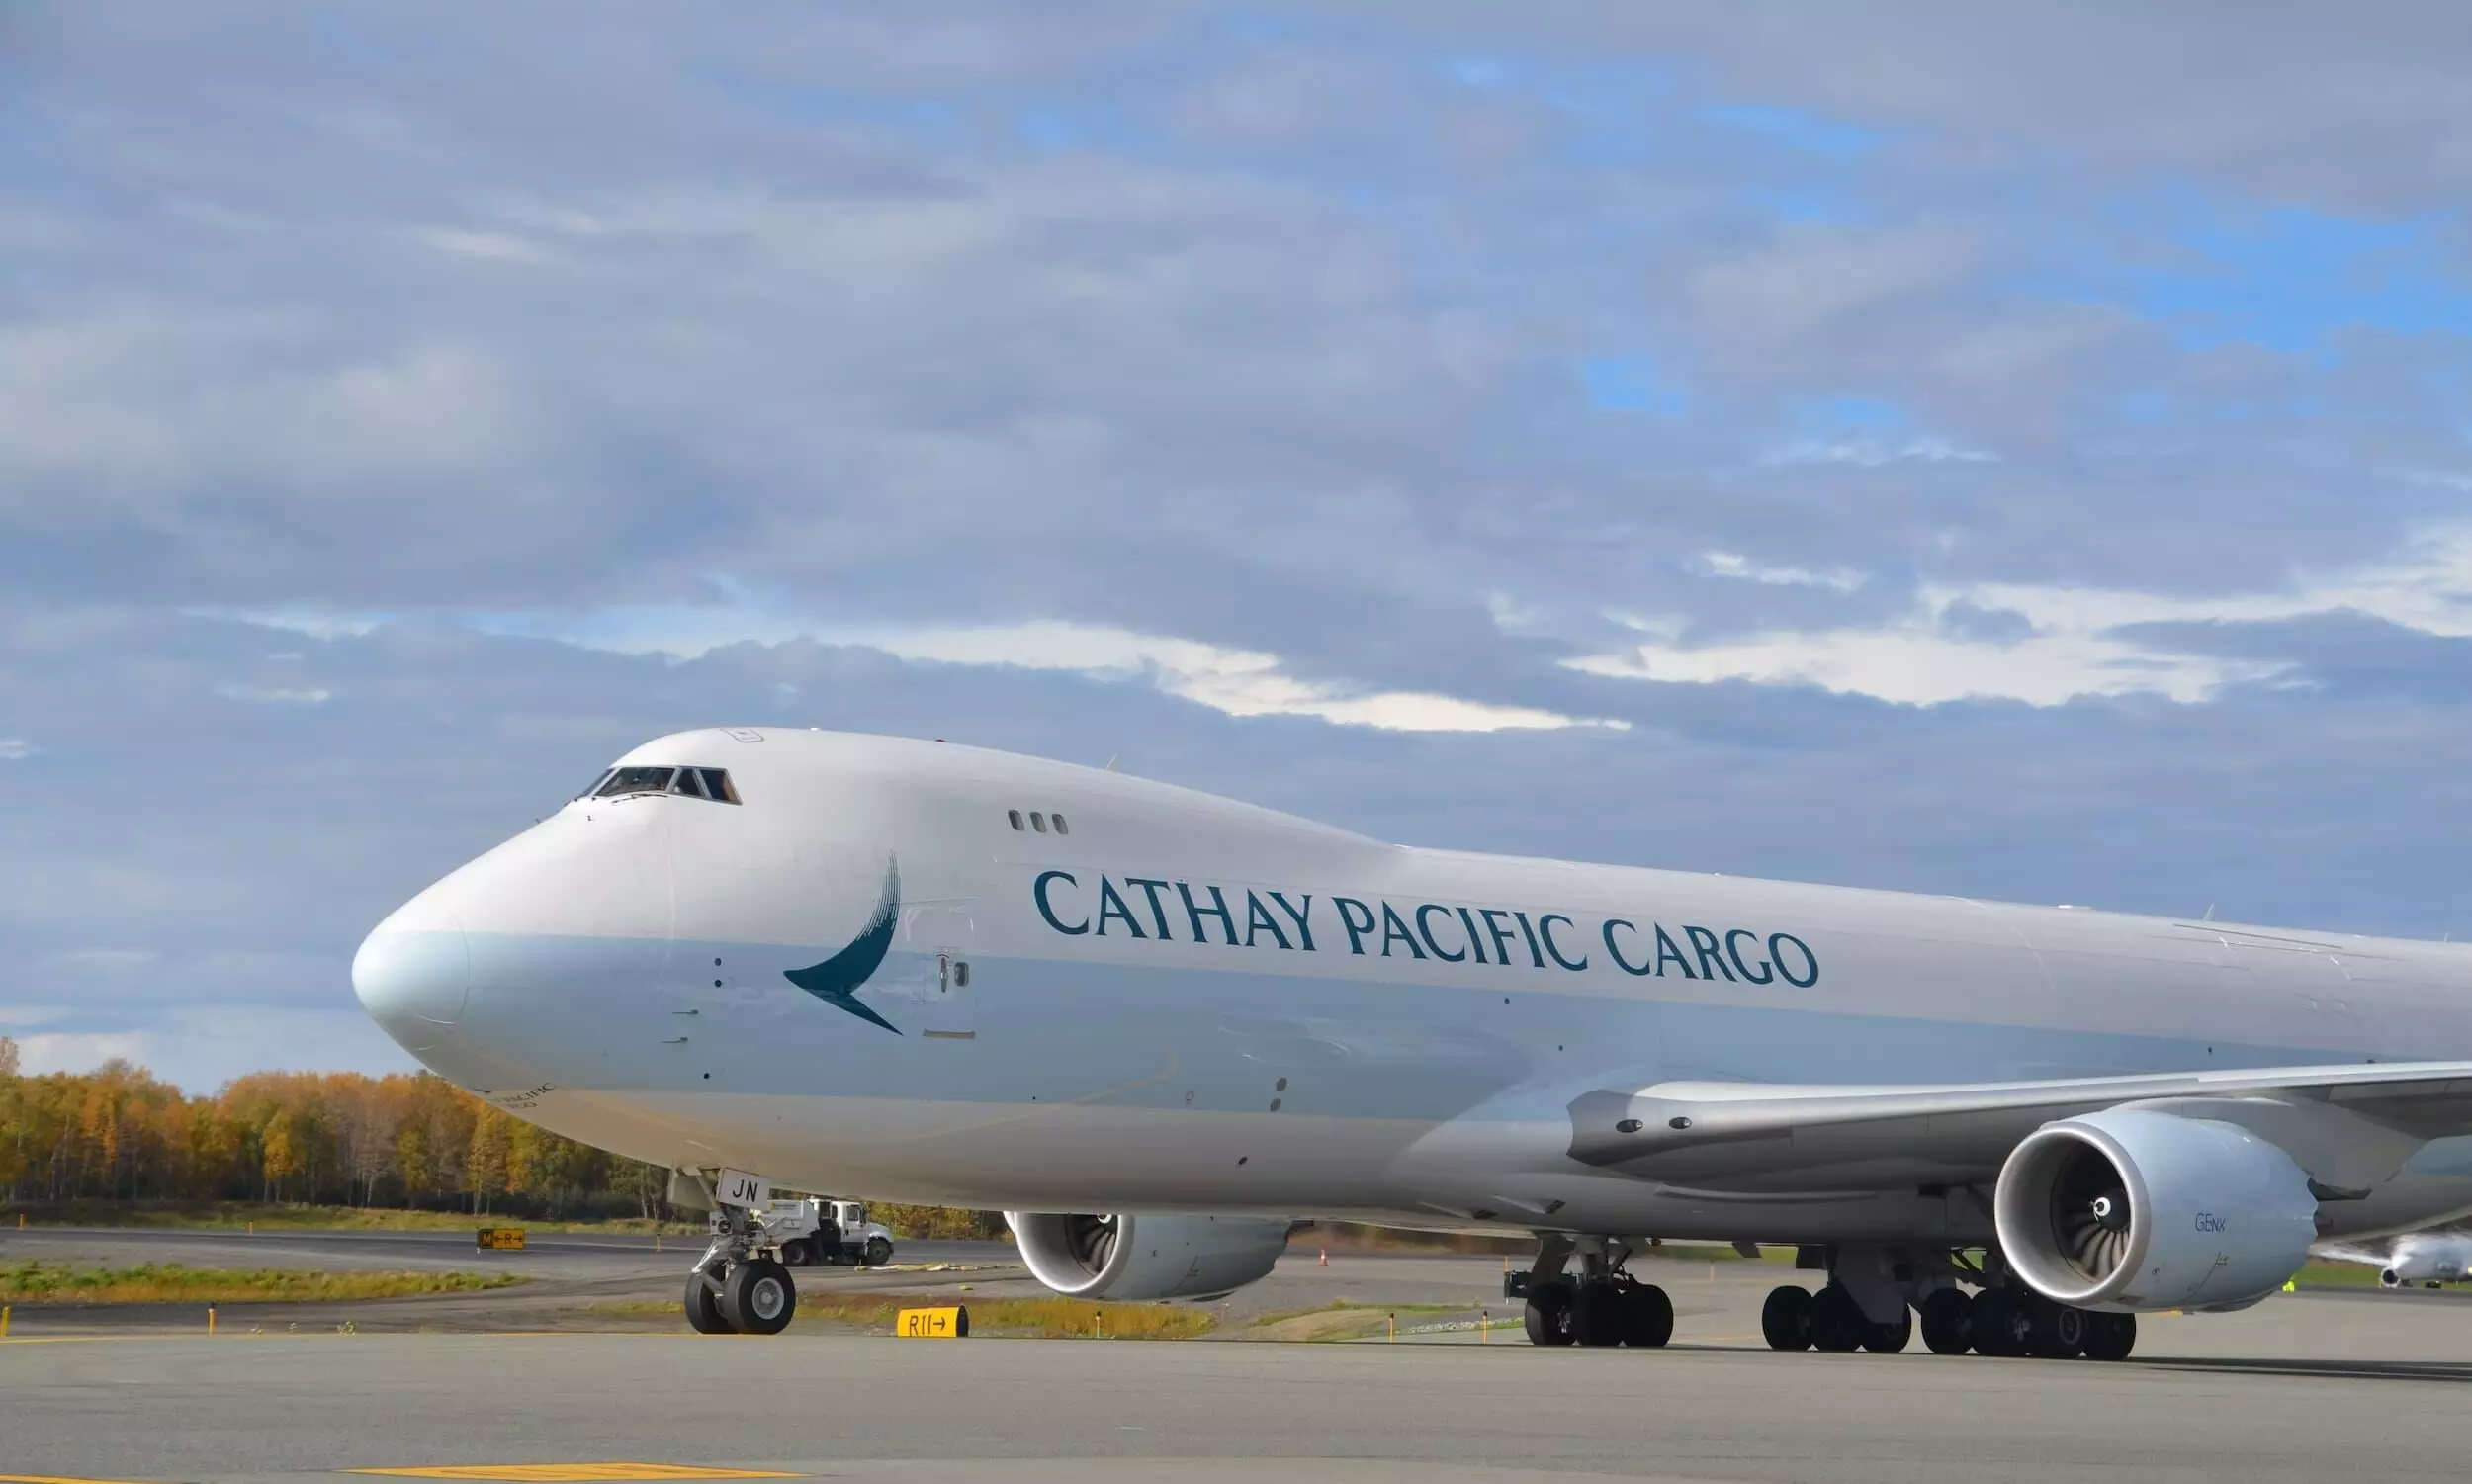 Cathay Pacific cargo carried up 19% in May